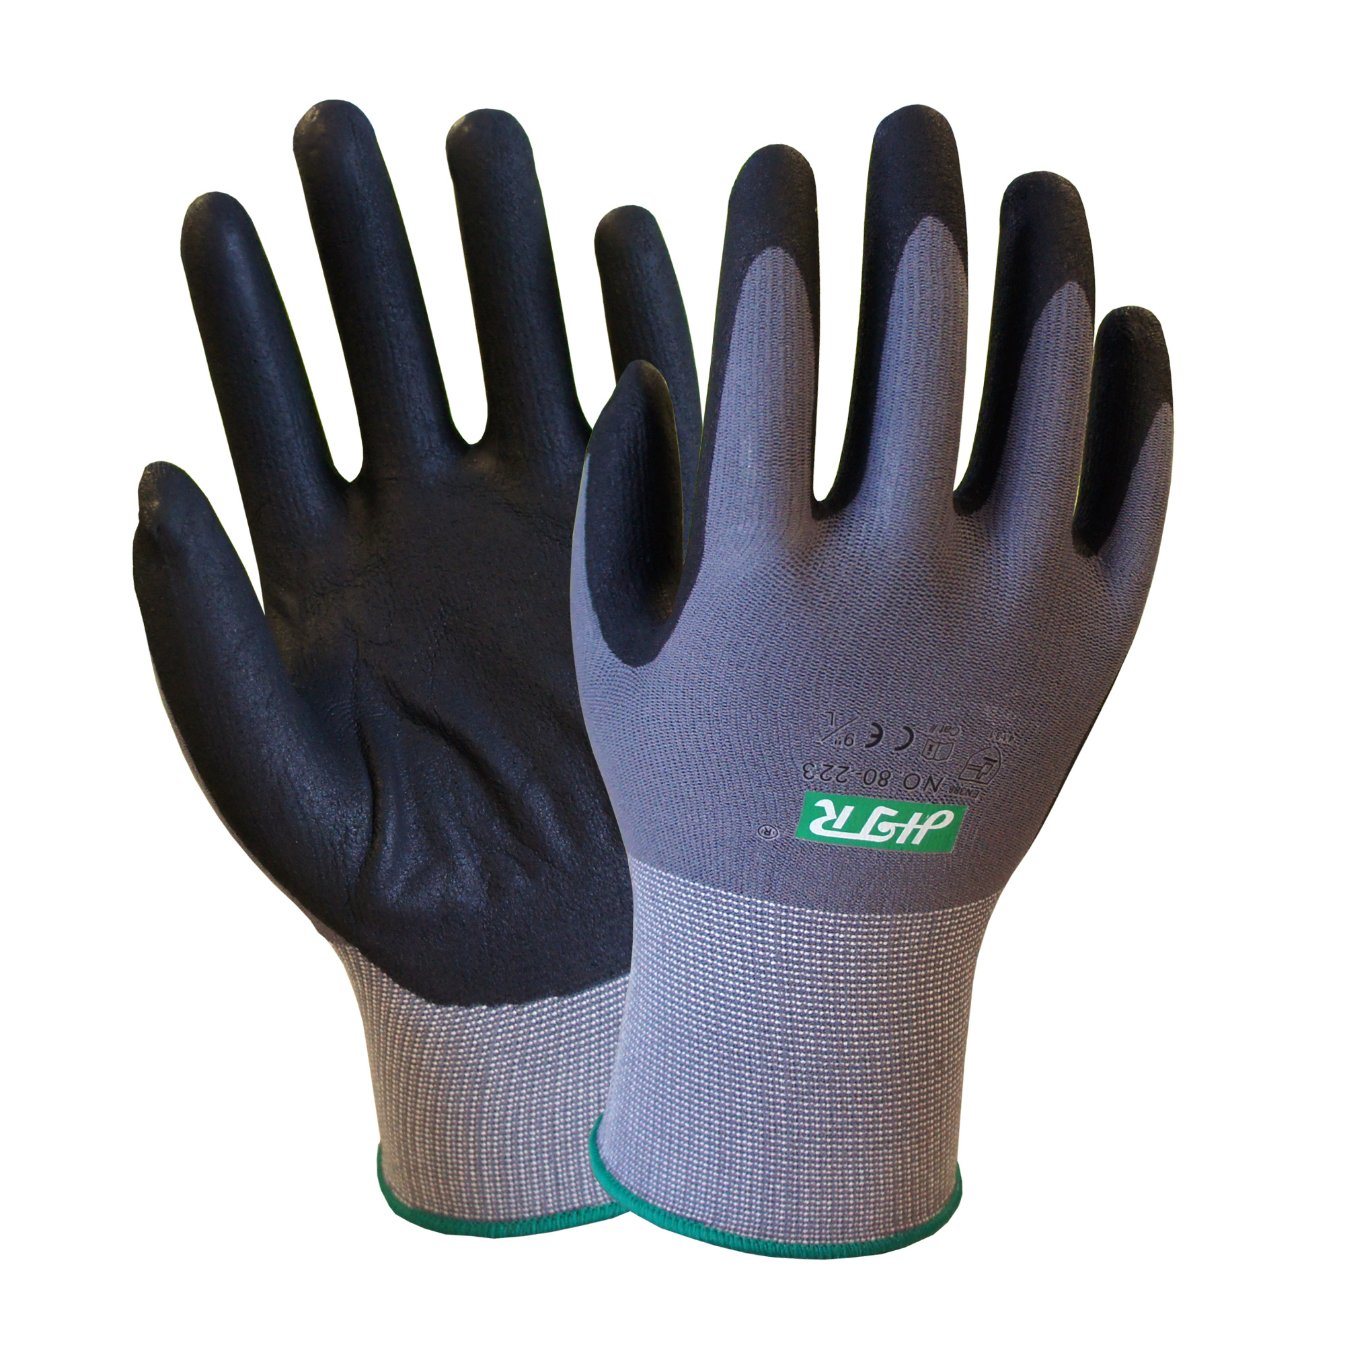 15 Gauge Knitted Oil-Proof Work Gloves with Nitrile Palm